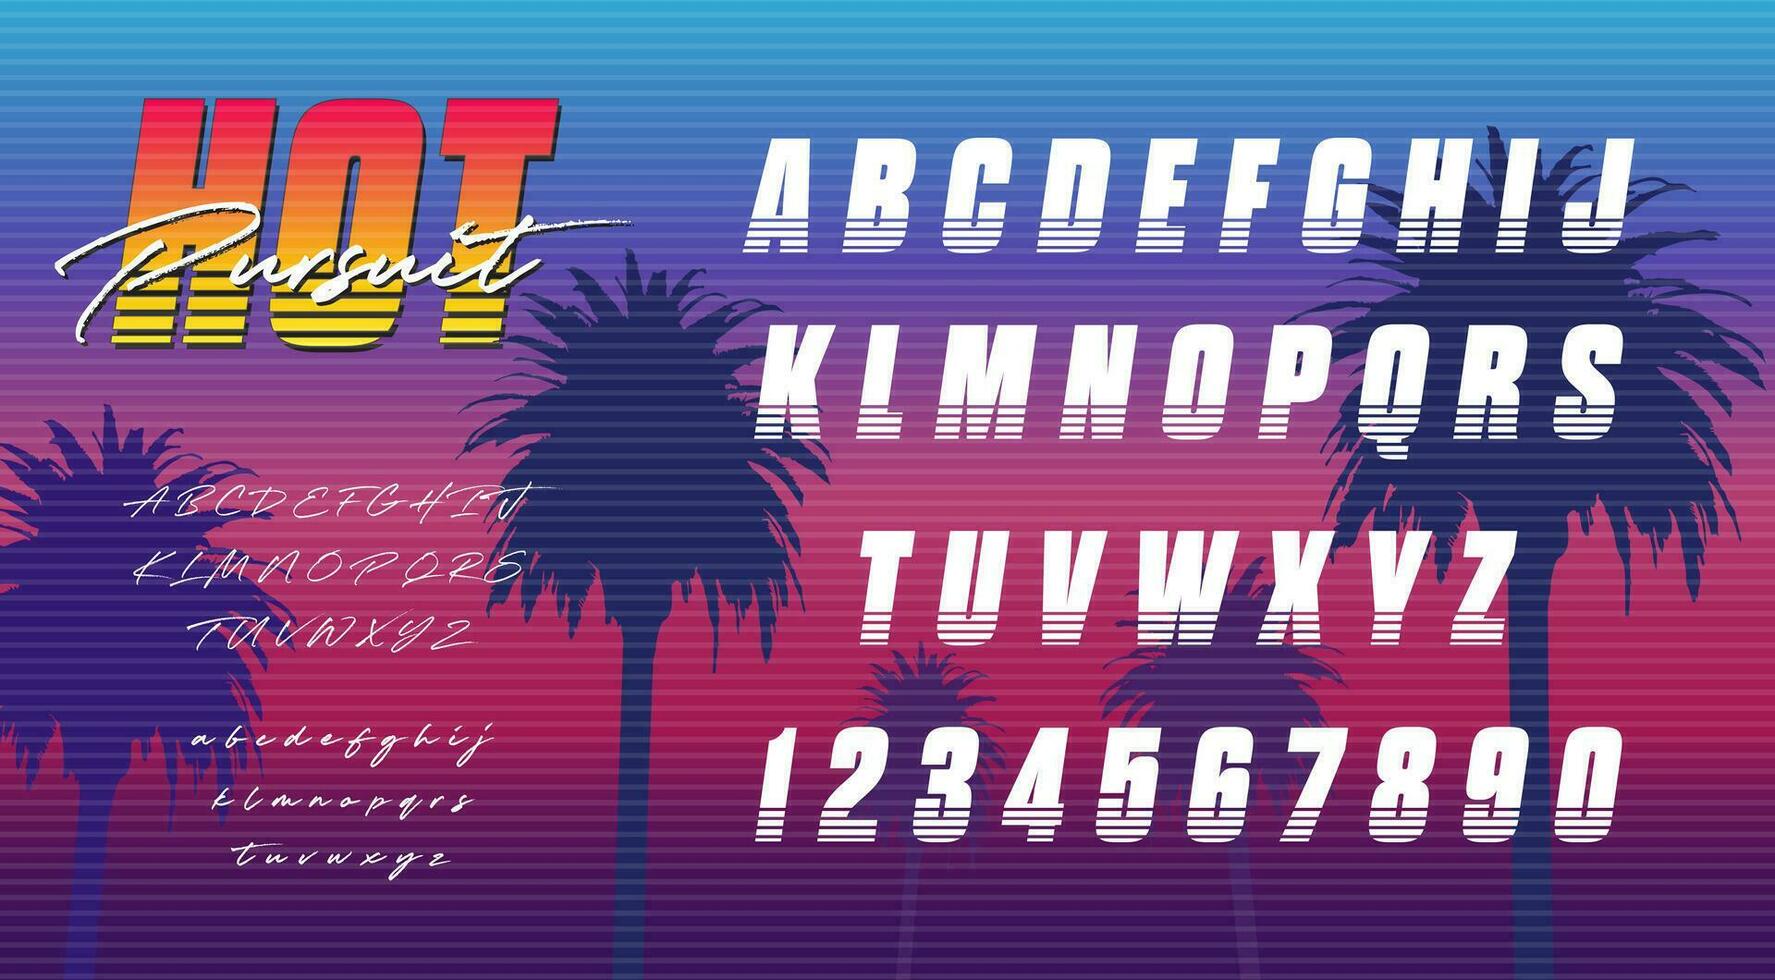 https://static.vecteezy.com/system/resources/previews/025/432/162/non_2x/80s-inspired-alphabet-collection-of-letters-and-numbers-influenced-by-retro-90s-style-lettering-from-la-and-miami-synthwave-typography-for-flyers-and-posters-vintage-logo-elements-vector.jpg